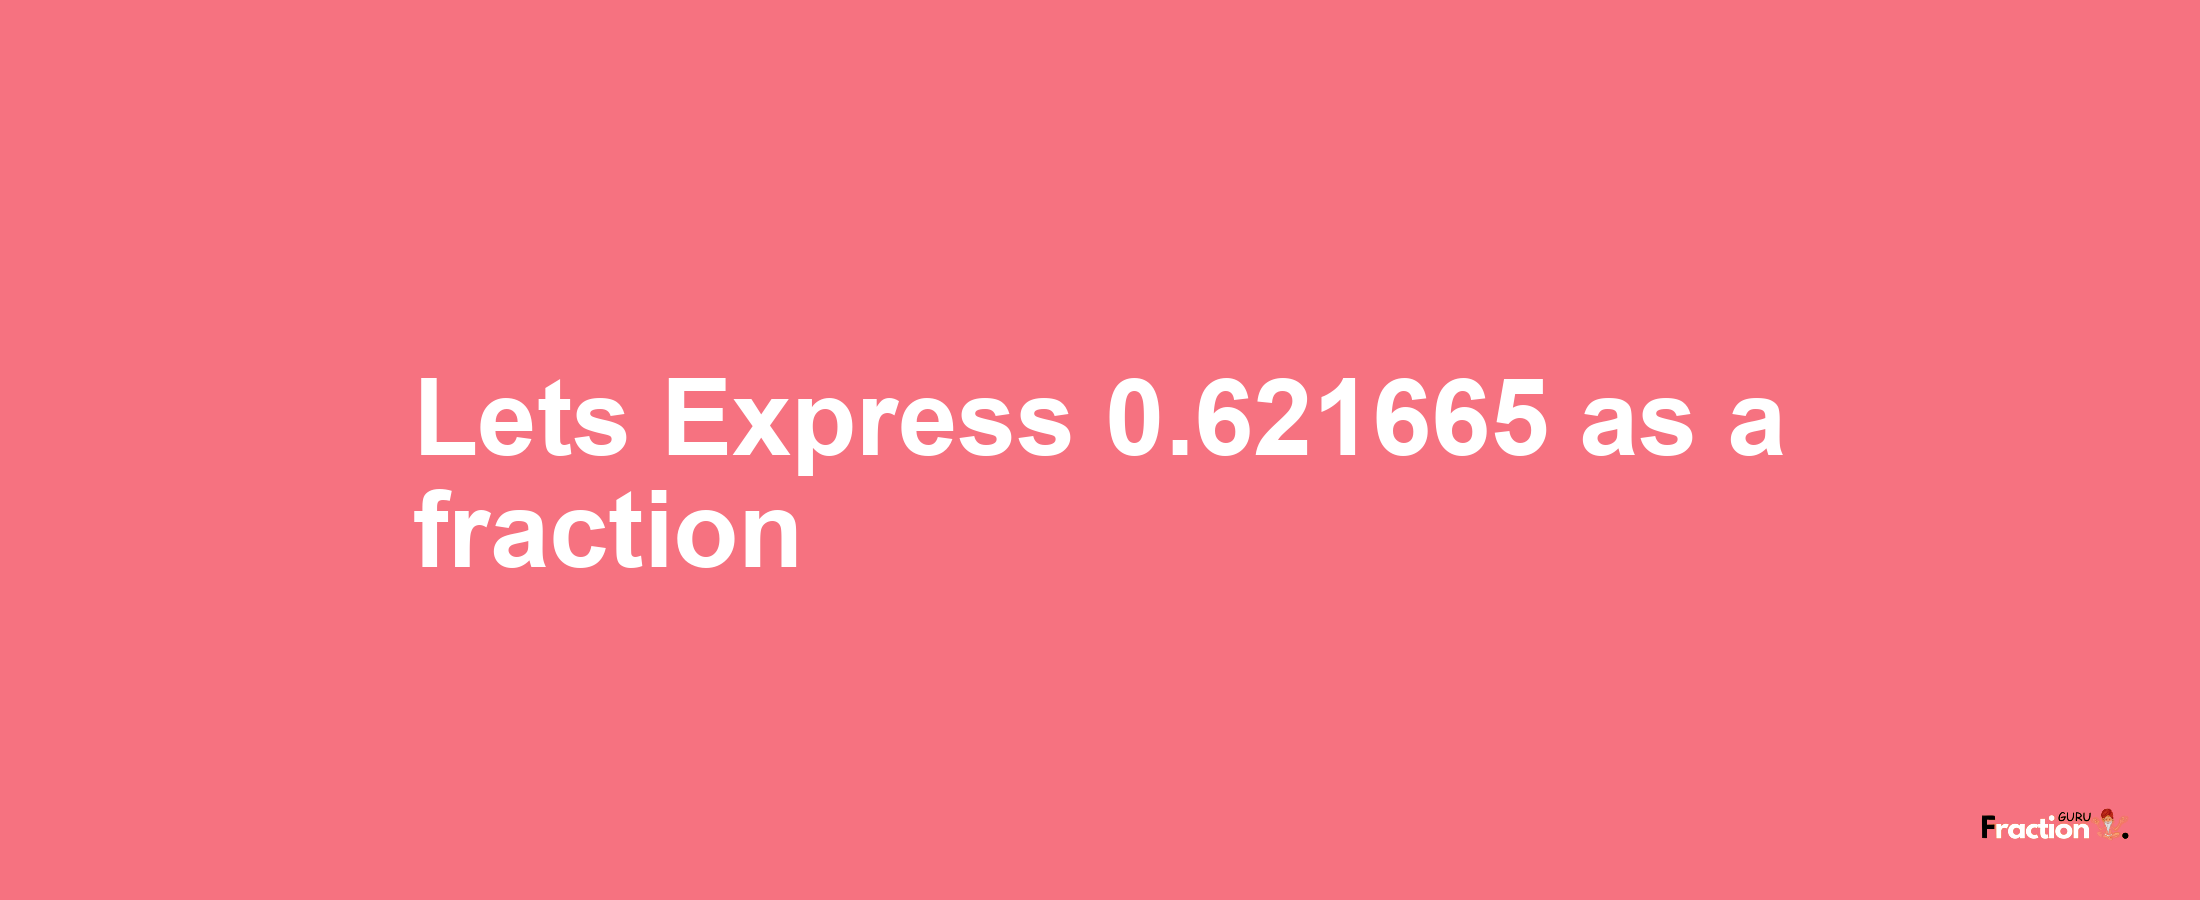 Lets Express 0.621665 as afraction